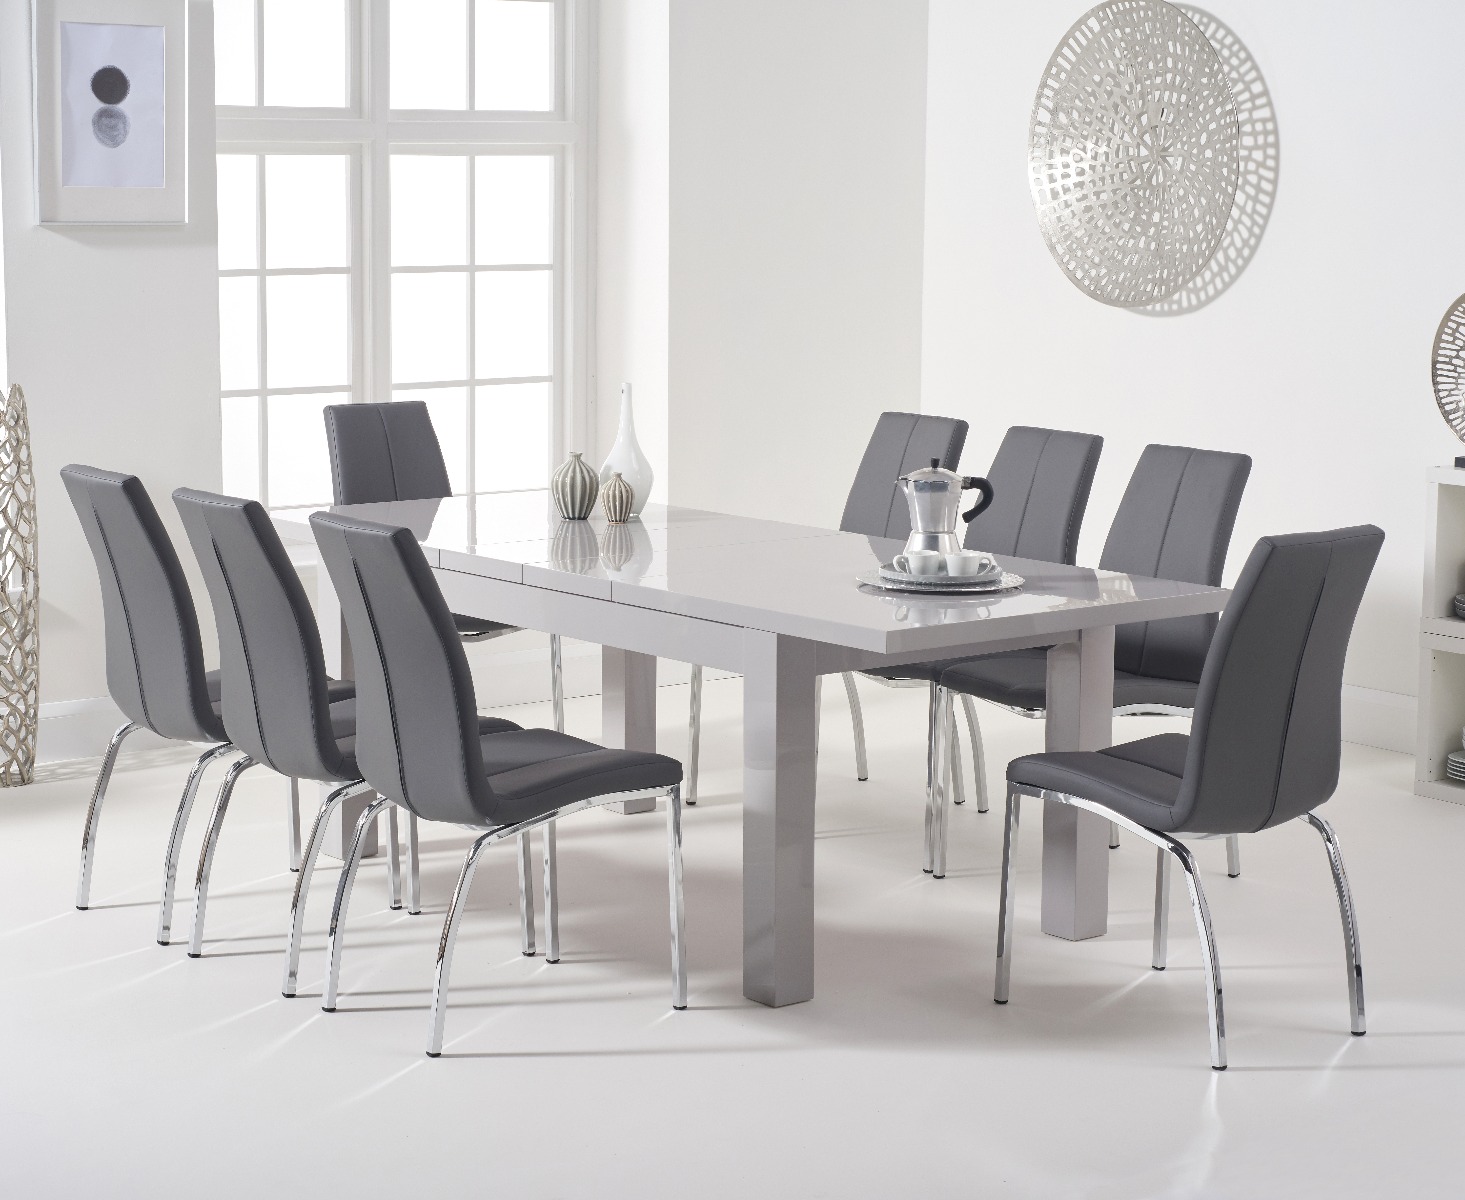 Extending Seattle 160cm Light Grey High Gloss Dining Table With 6 White Marco Chairs